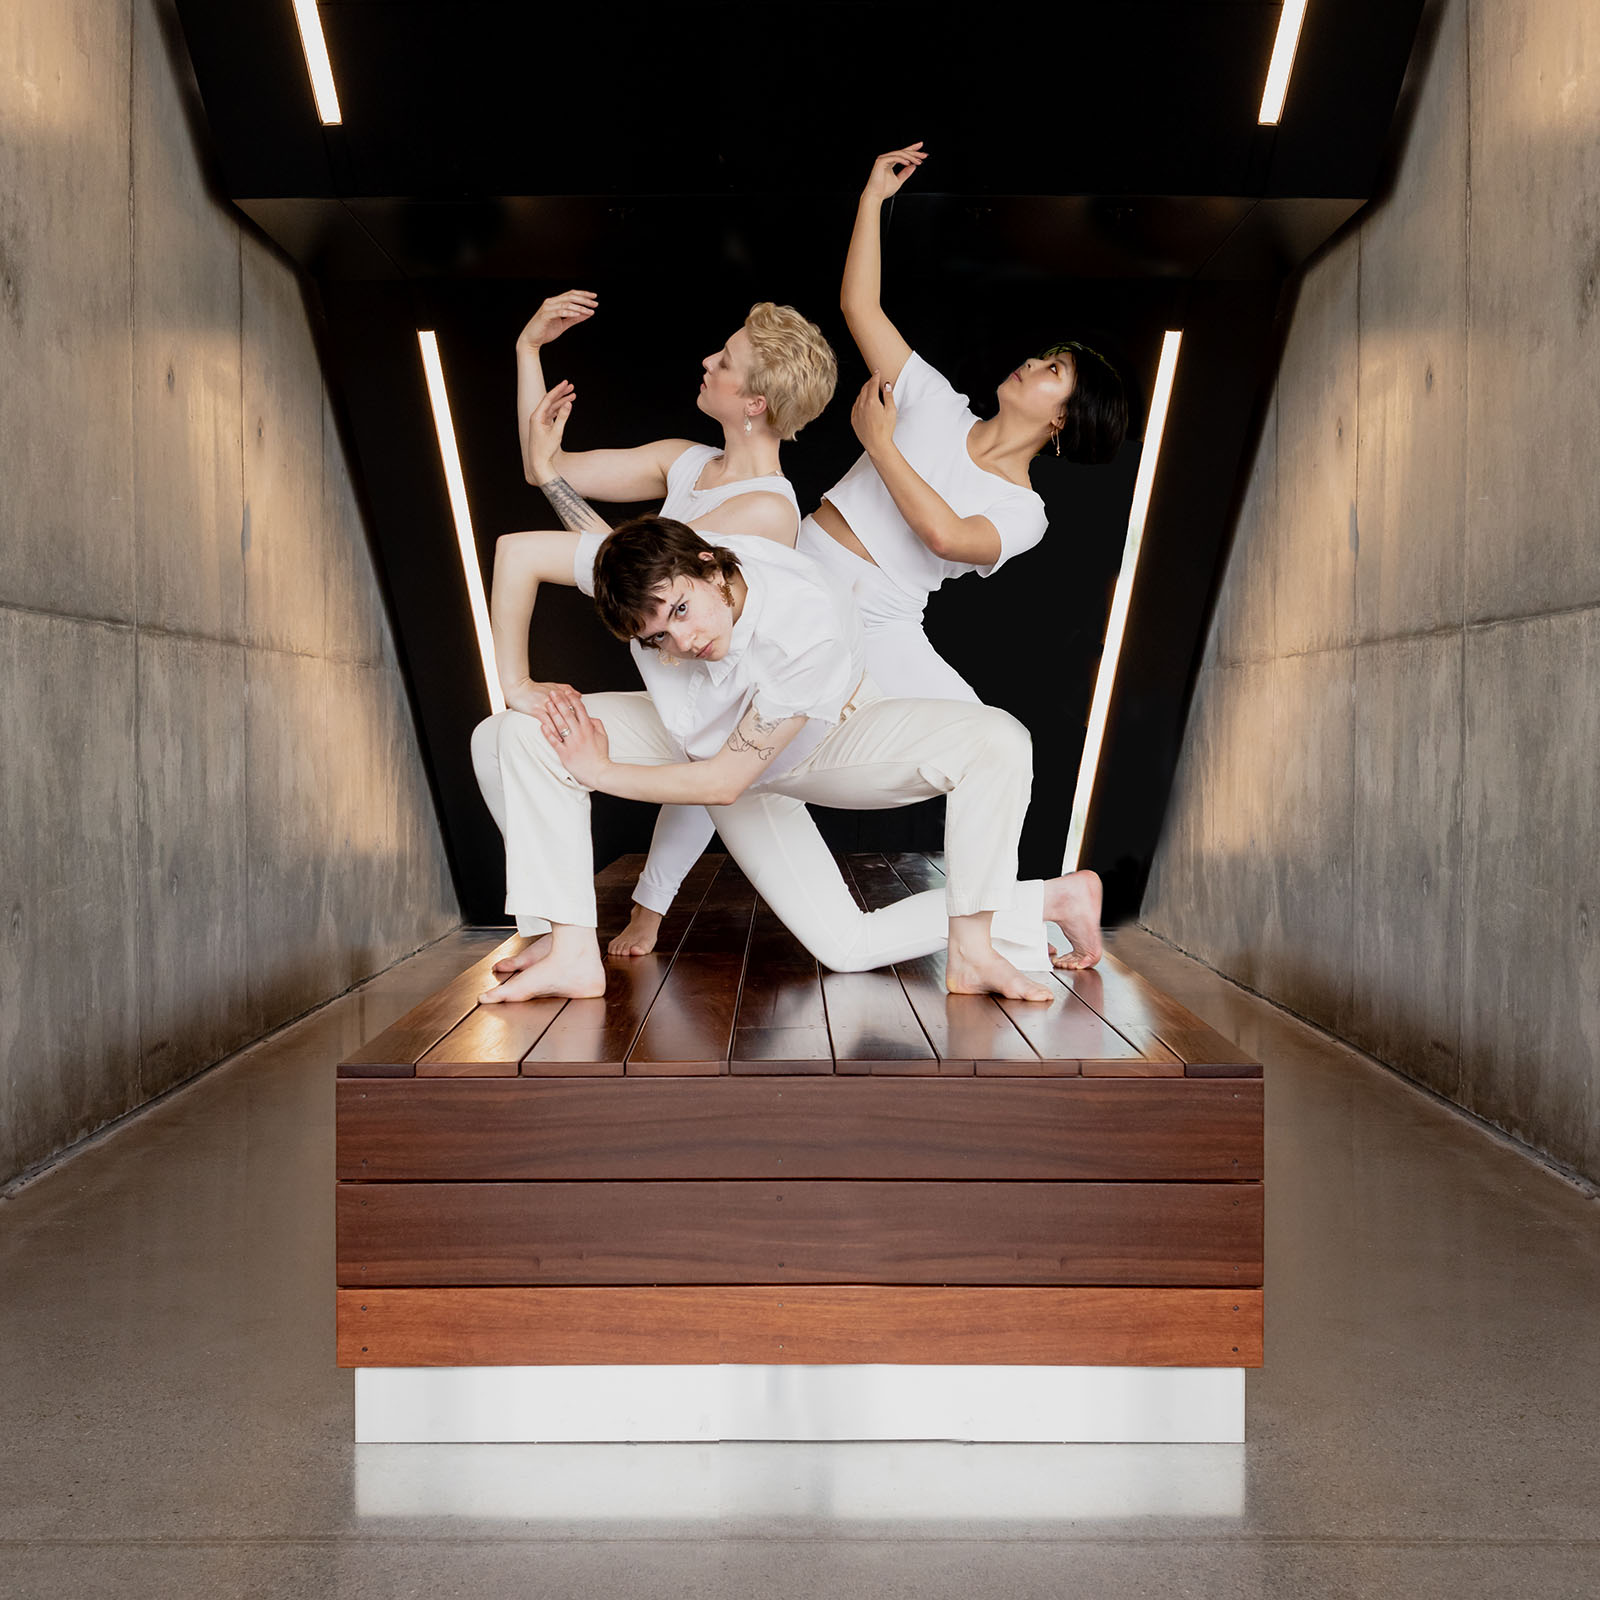 three dancers in white strike low, angular poses in a small space of concrete and wood with modern lighting and details